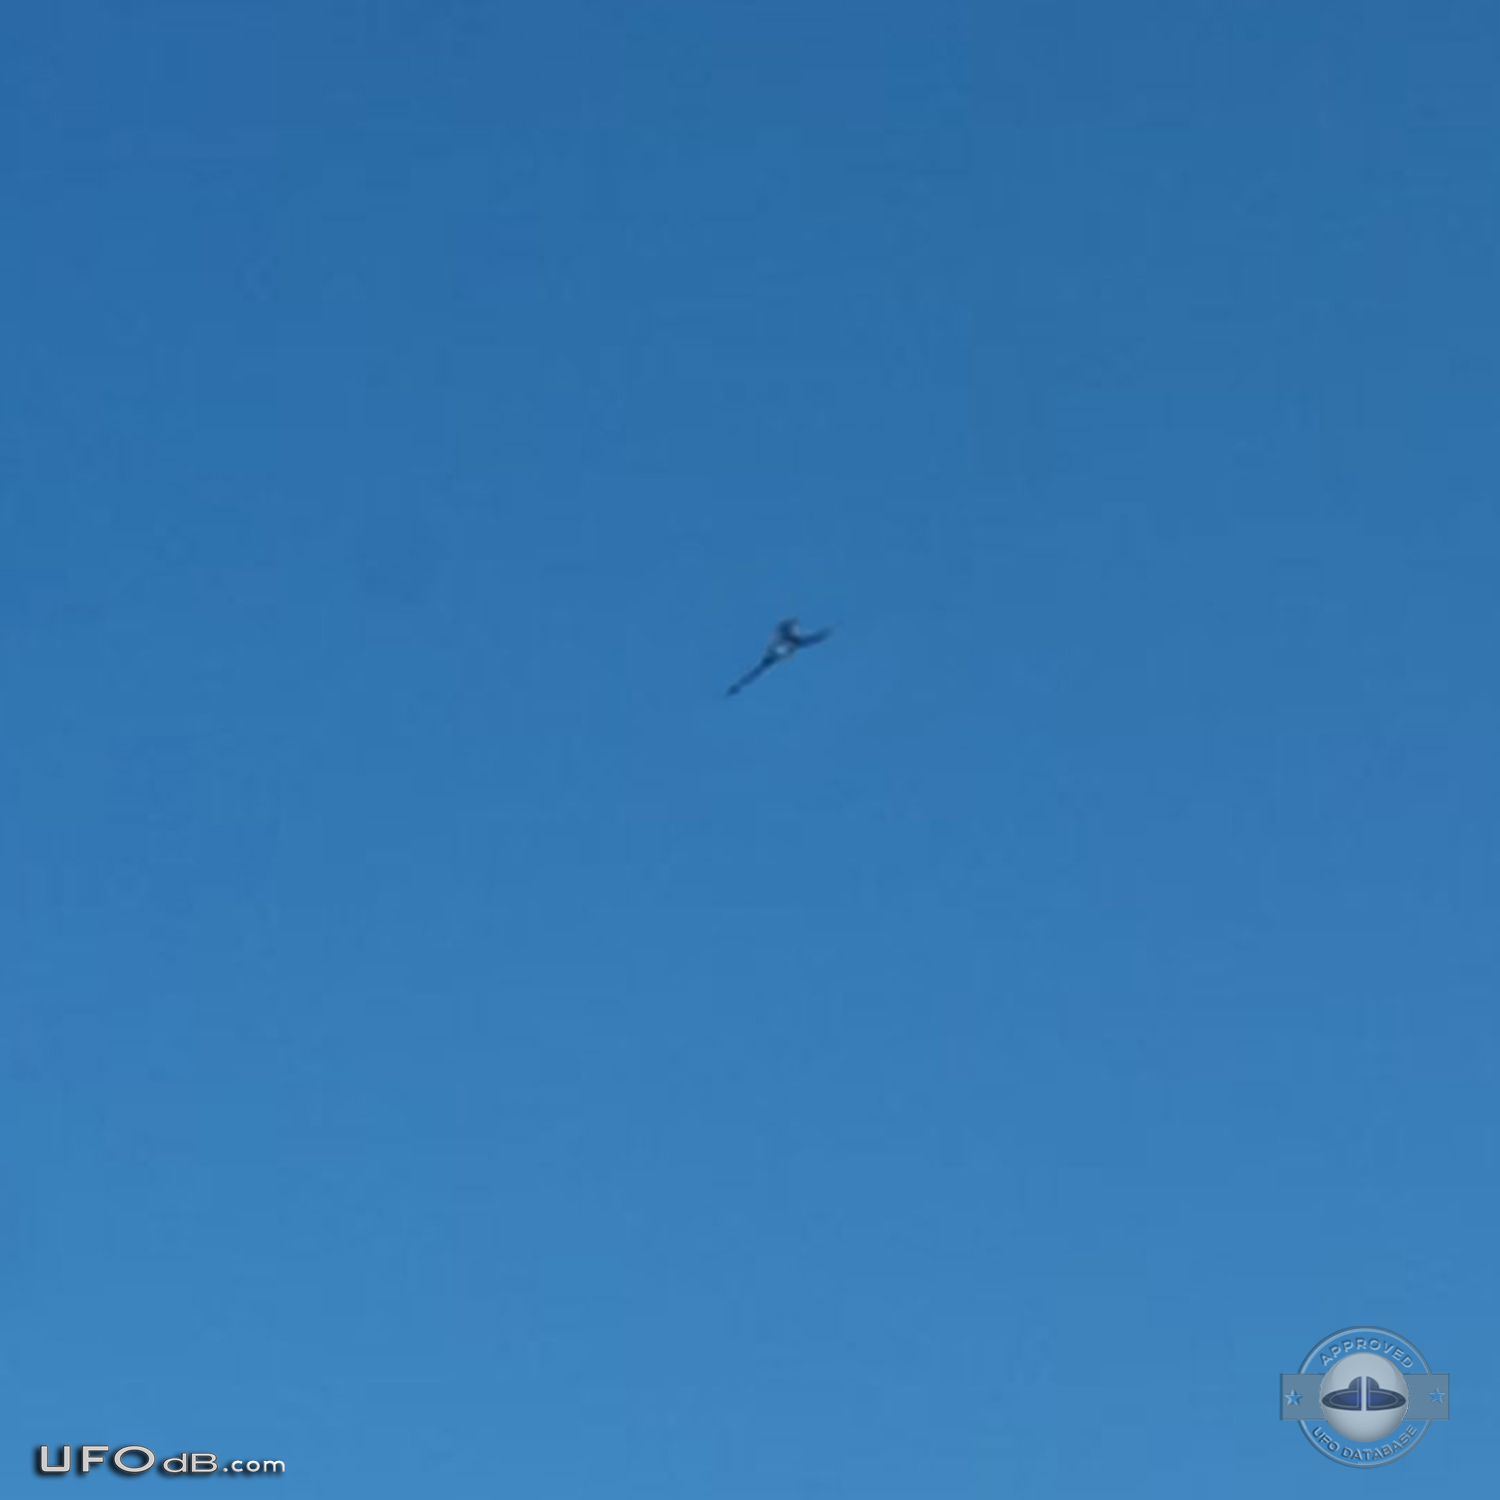 UFO similar to Star Trek Klingon ship seen over Canary Island in 2011 UFO Picture #483-2